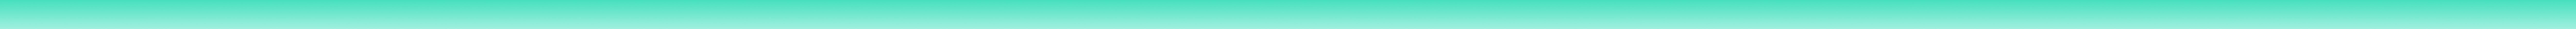 LINE (Gradient) WHITE DOWN (THIN VERSION).png